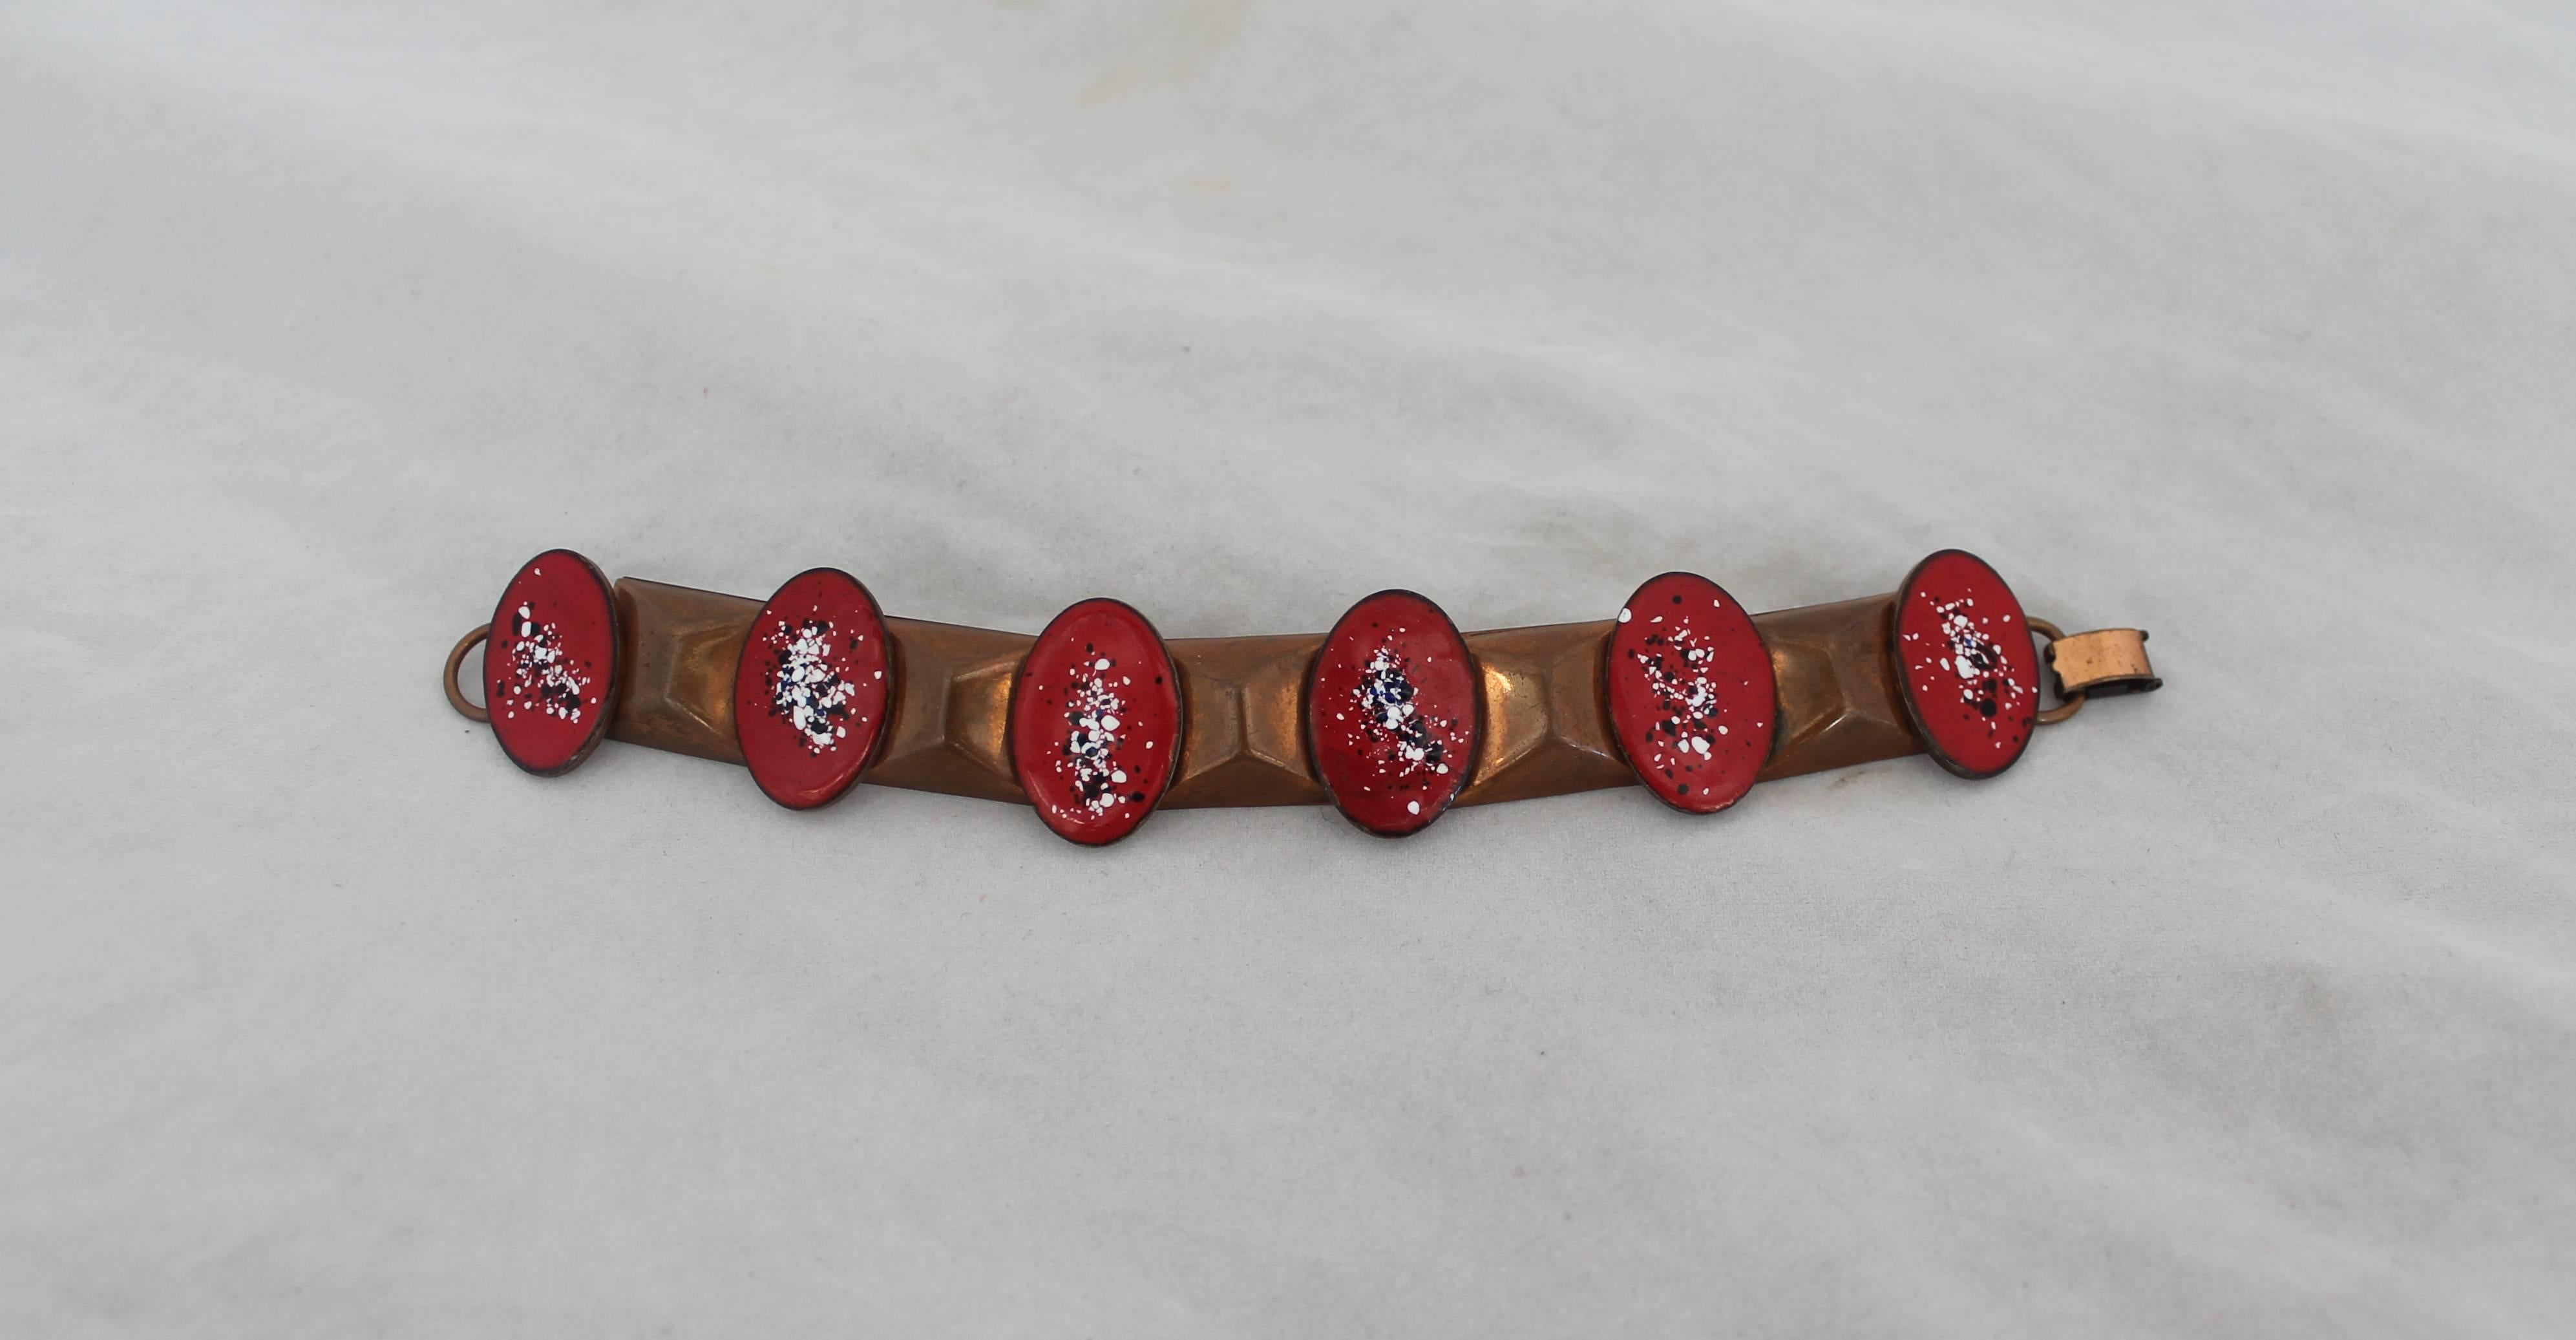 Rebajes Vintage Copper and Red Enamel Oval Bracelet - Circa 1950's.  This artsy vintage bracelet is in good condition with only some wear consistent with its age.  It features a lovely copper metal with some dark brushing for added depth, red enamel